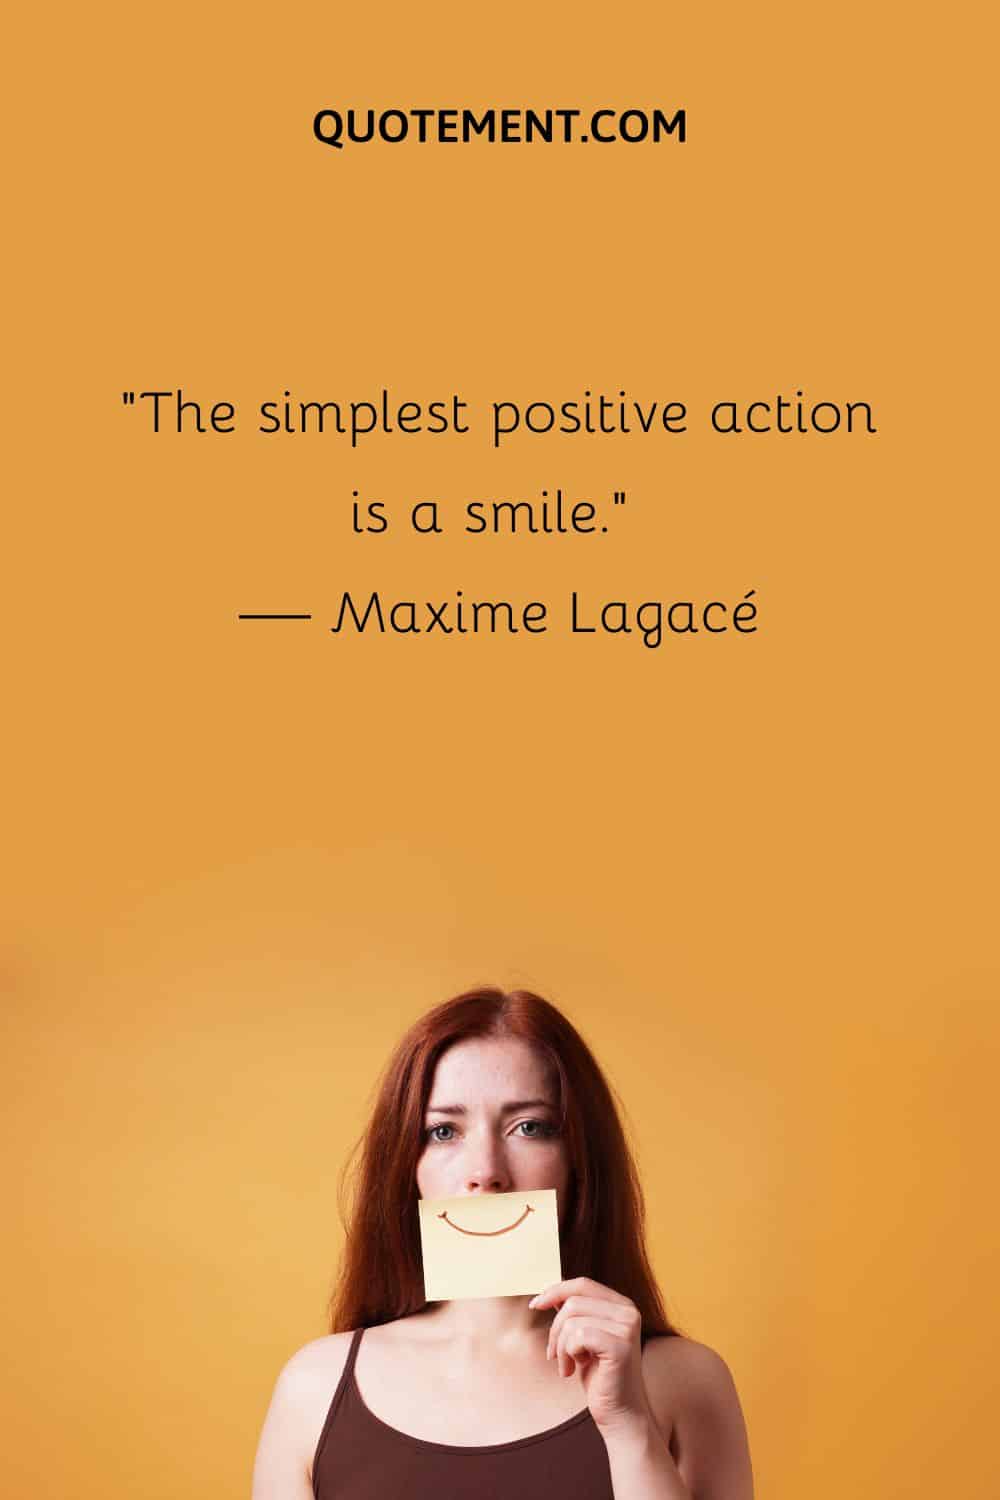 The simplest positive action is a smile